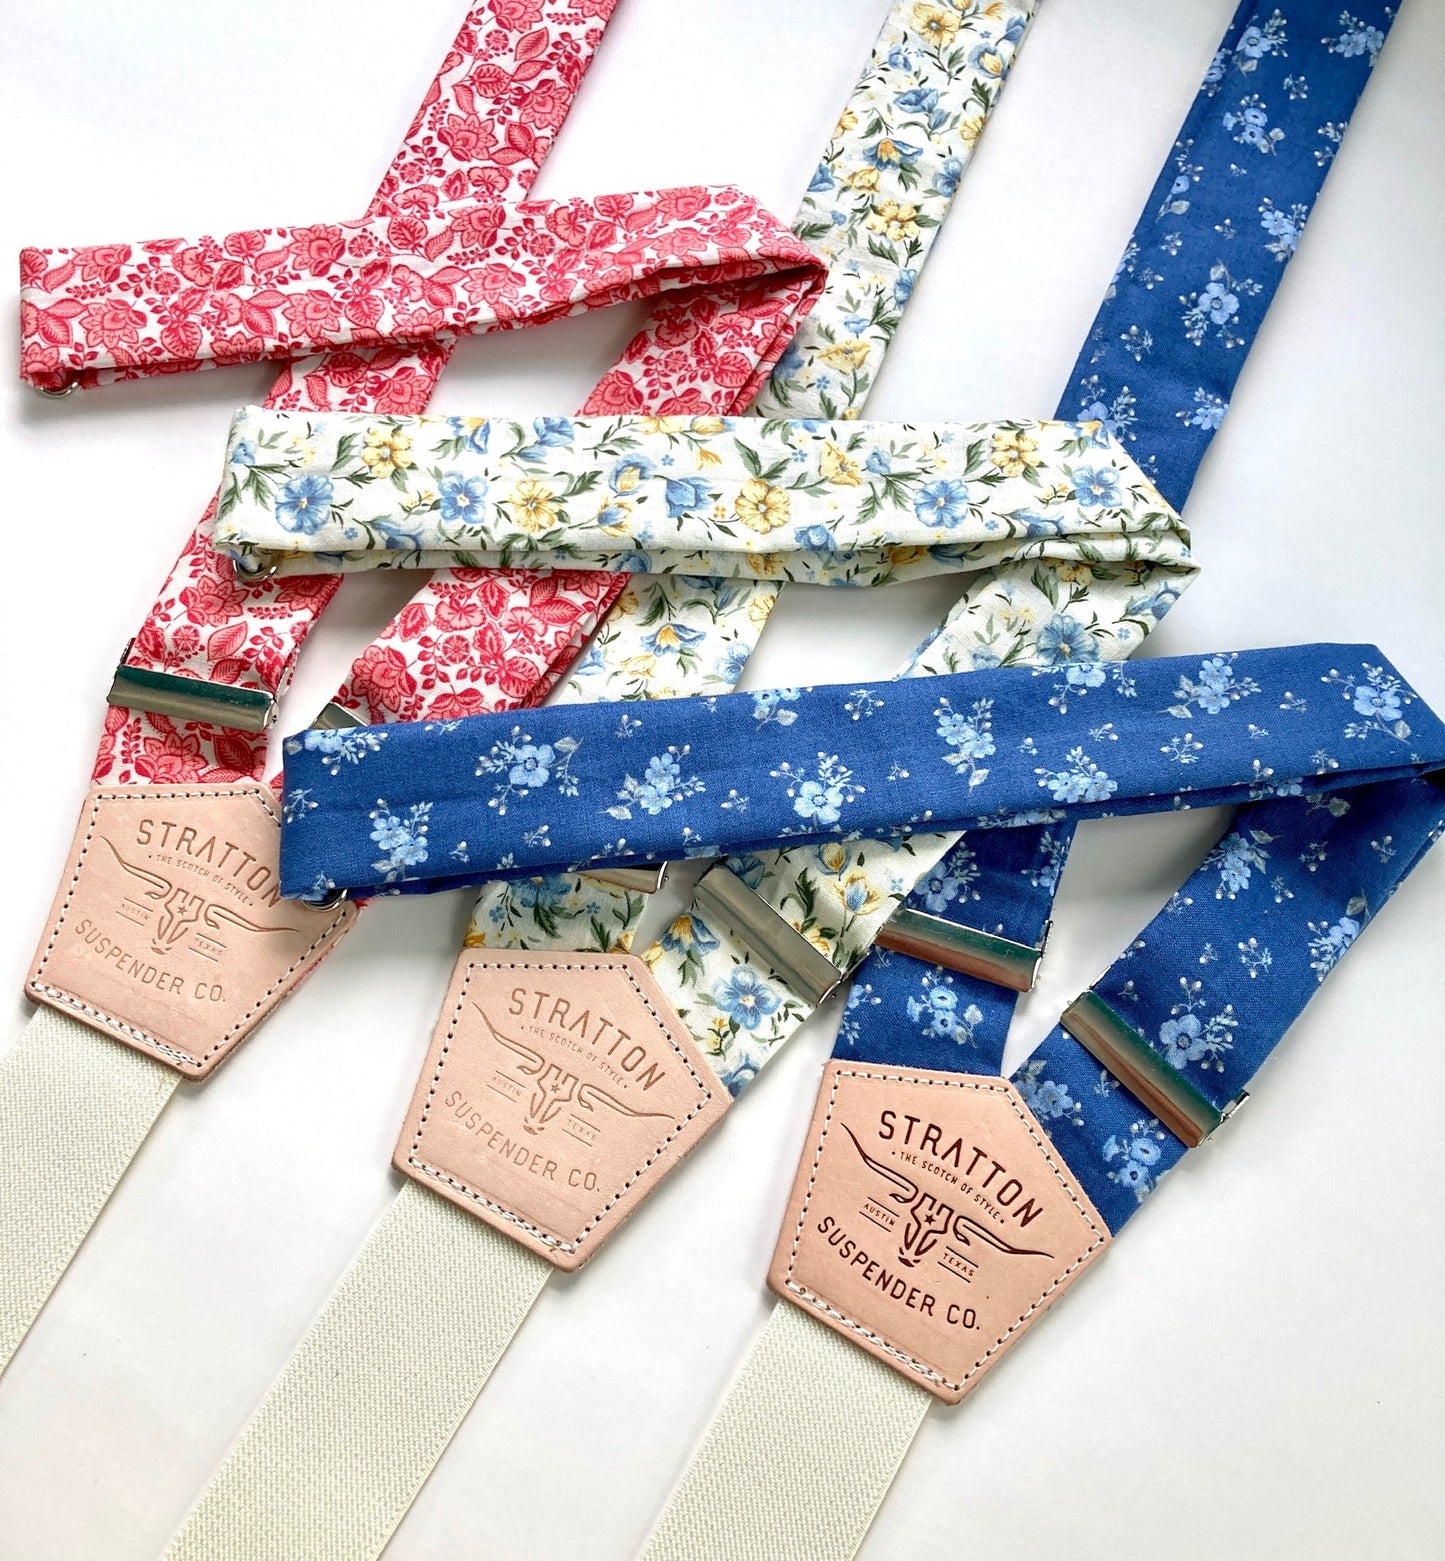 Stratton Suspender Co.’s Limited Edition 1880 Vintage Collection in Red, Cream, and Blue Floral